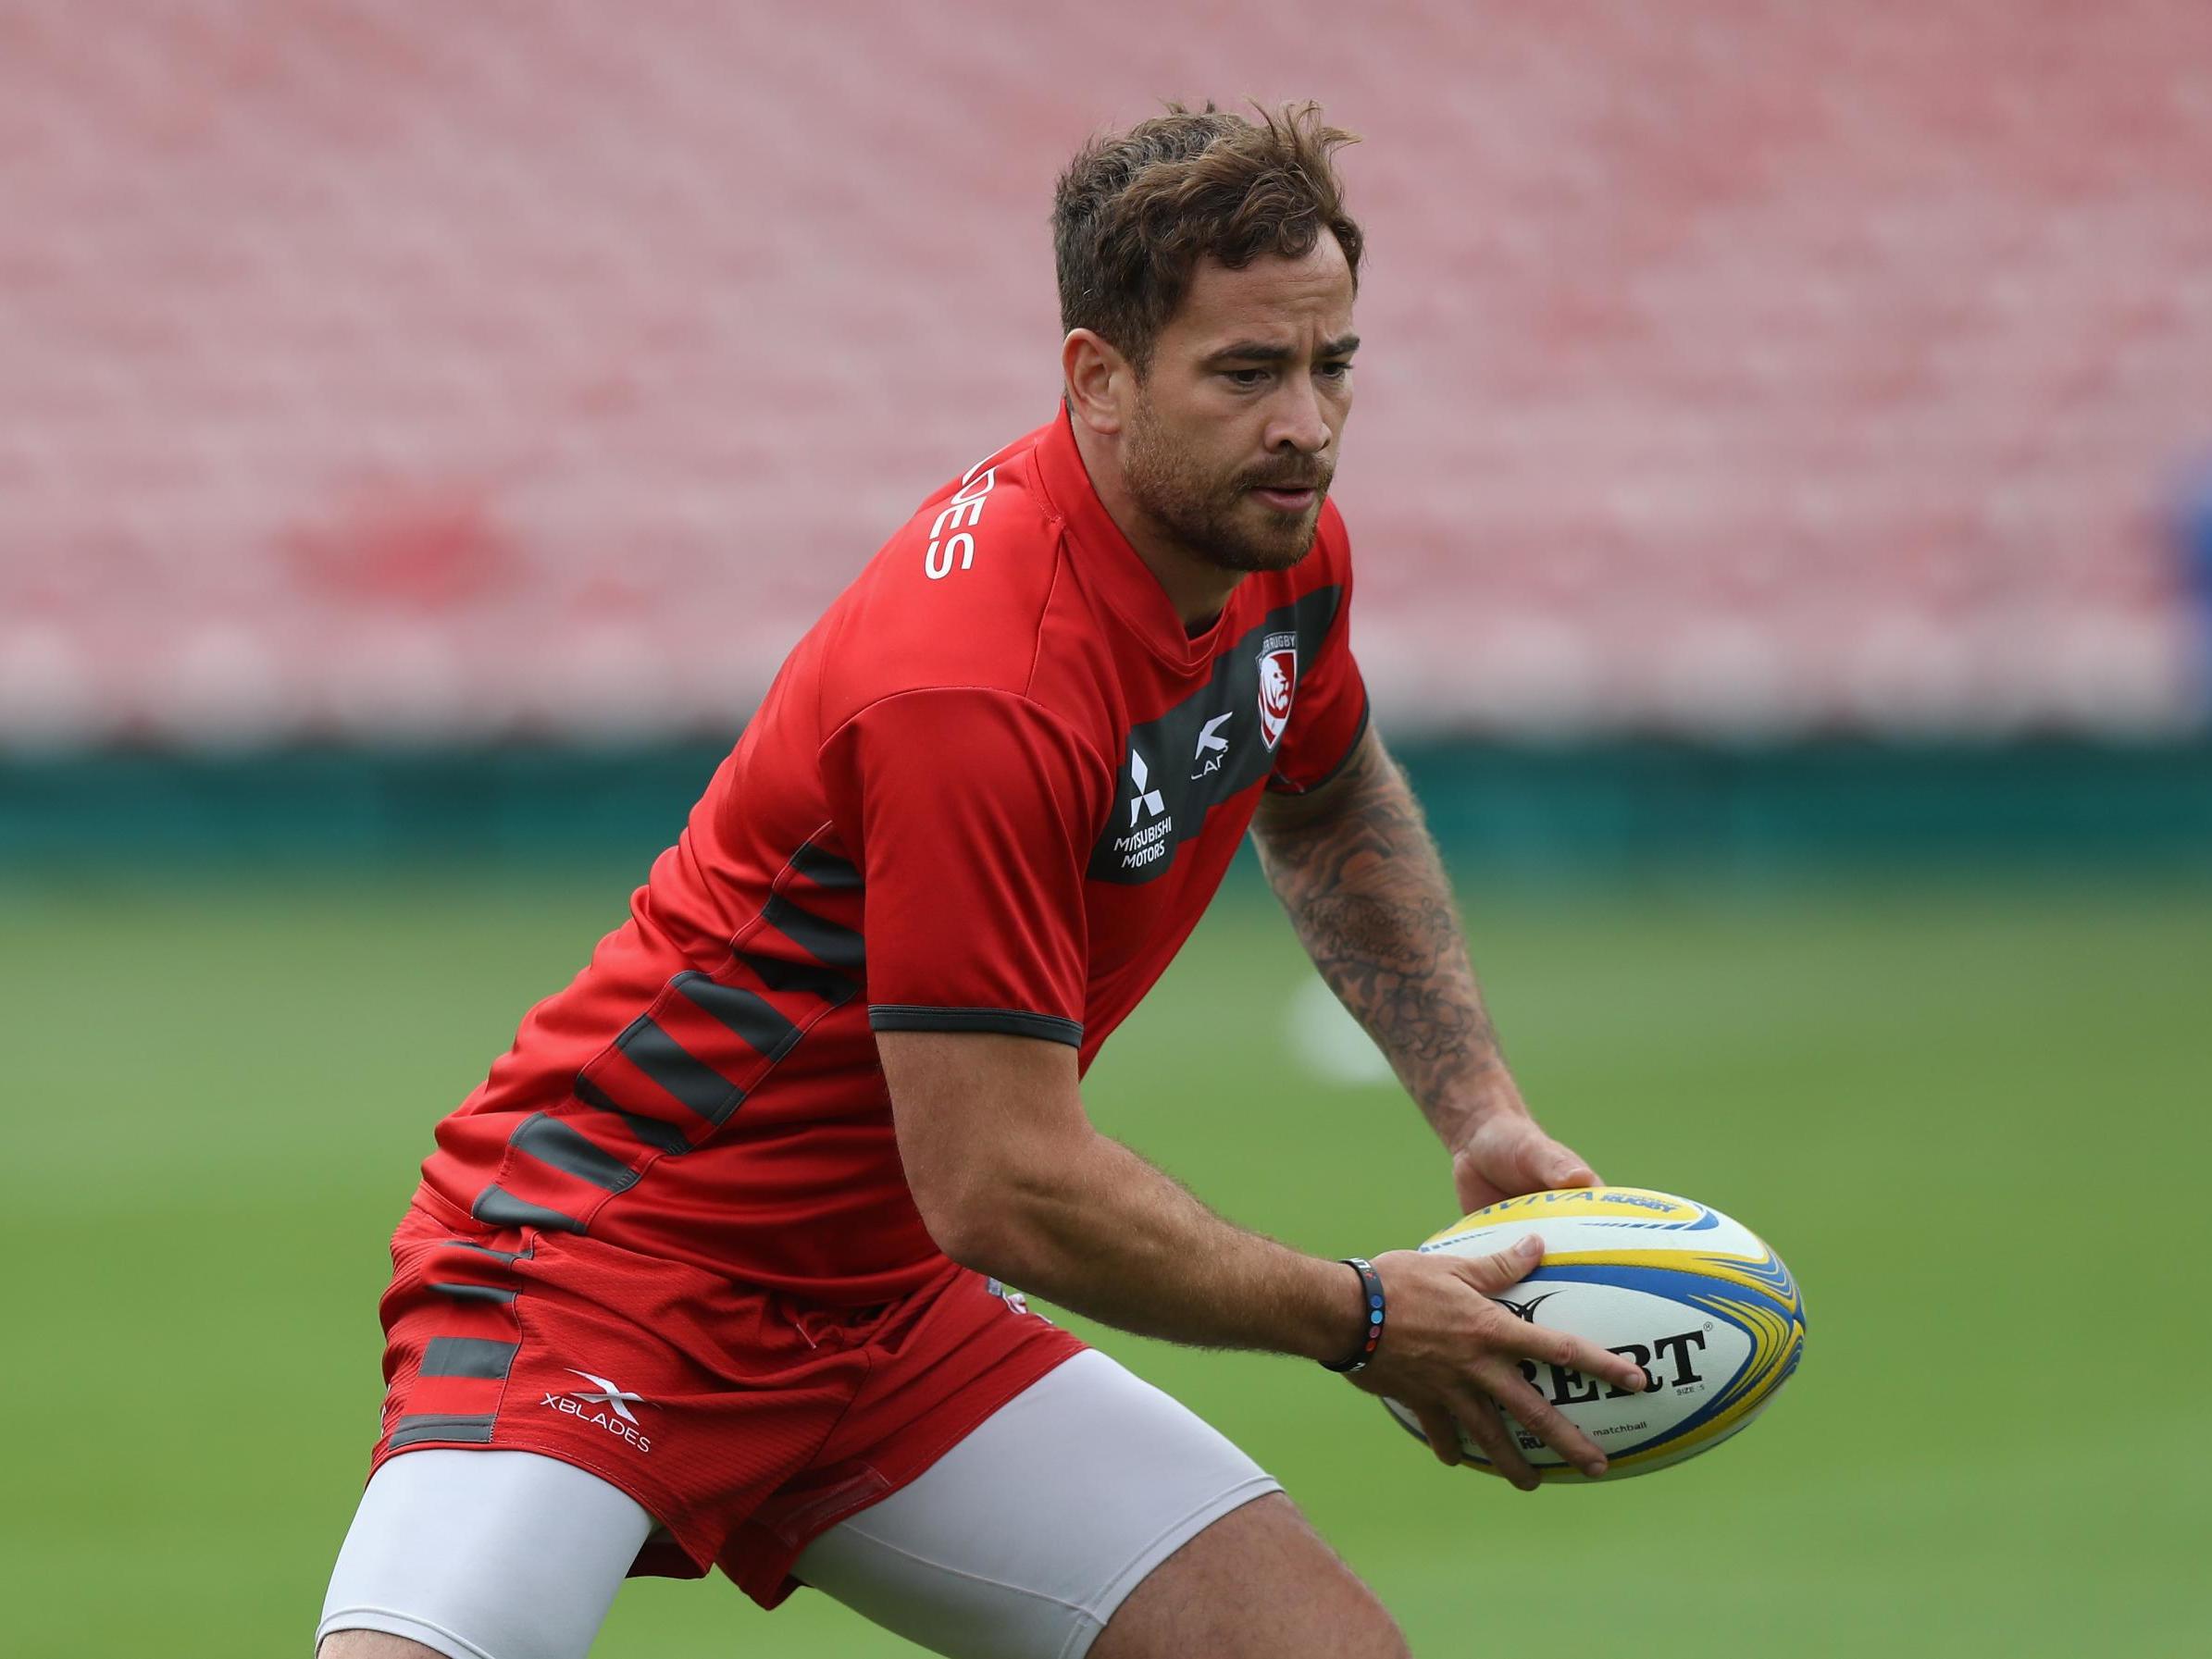 Gloucester hope to select Cipriani in Thursday's match against Dragons